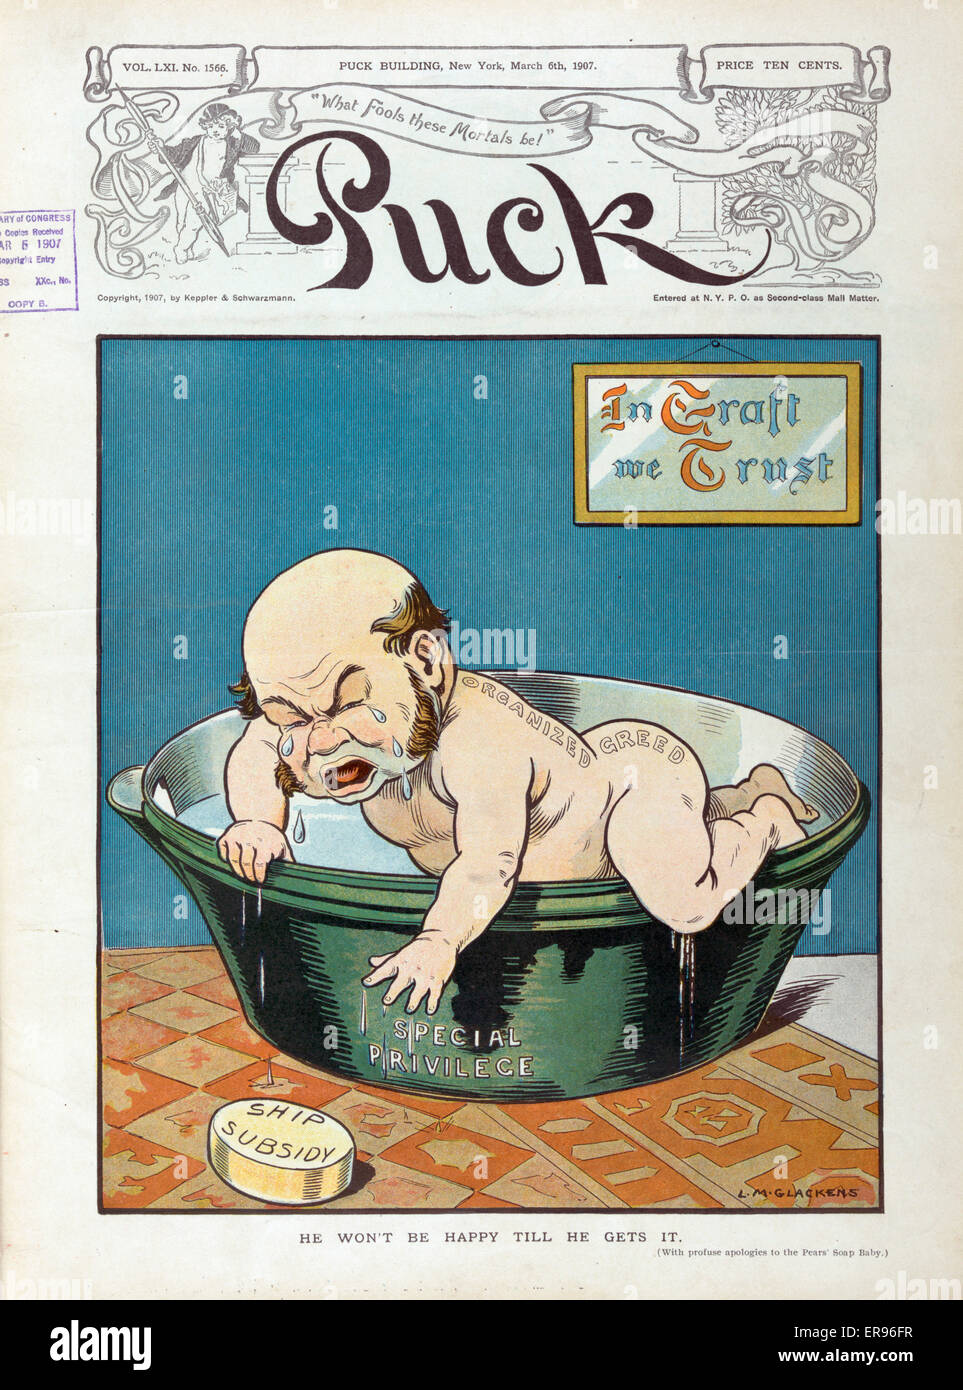 He won't be happy till he gets it (with profuse apologies to the Pears' Soap Baby). Illustration shows a man labeled Organized Greed, possibly Chauncey M. Depew, as a baby trying to climb out of a tub of bath water labeled Special Privilege, reaching for Stock Photo